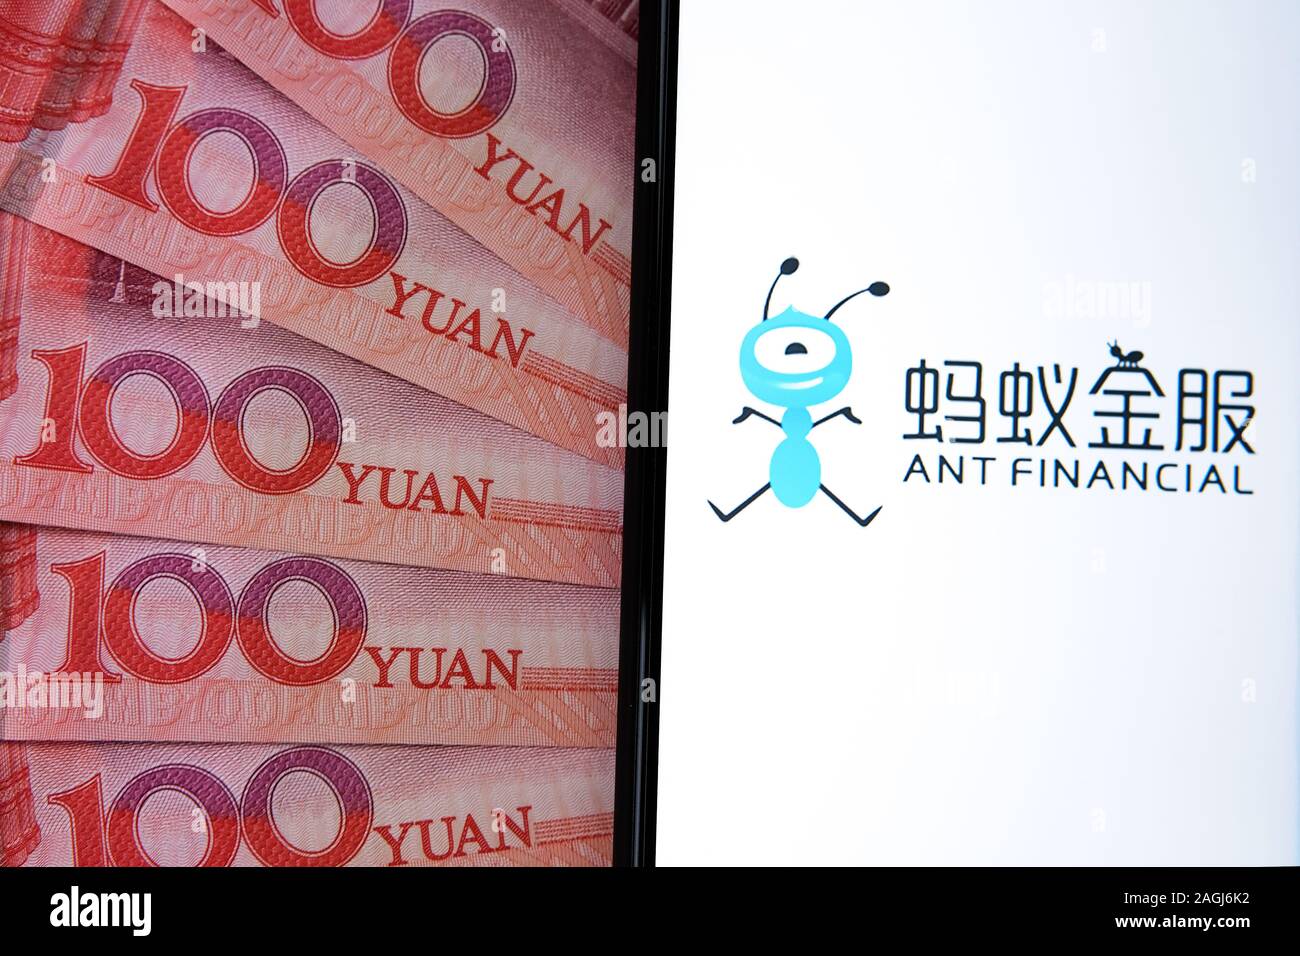 Ant Financial logo on the smartphone screen next to Chinese 100 Yuan banknotes. Conceptual photo. Stock Photo